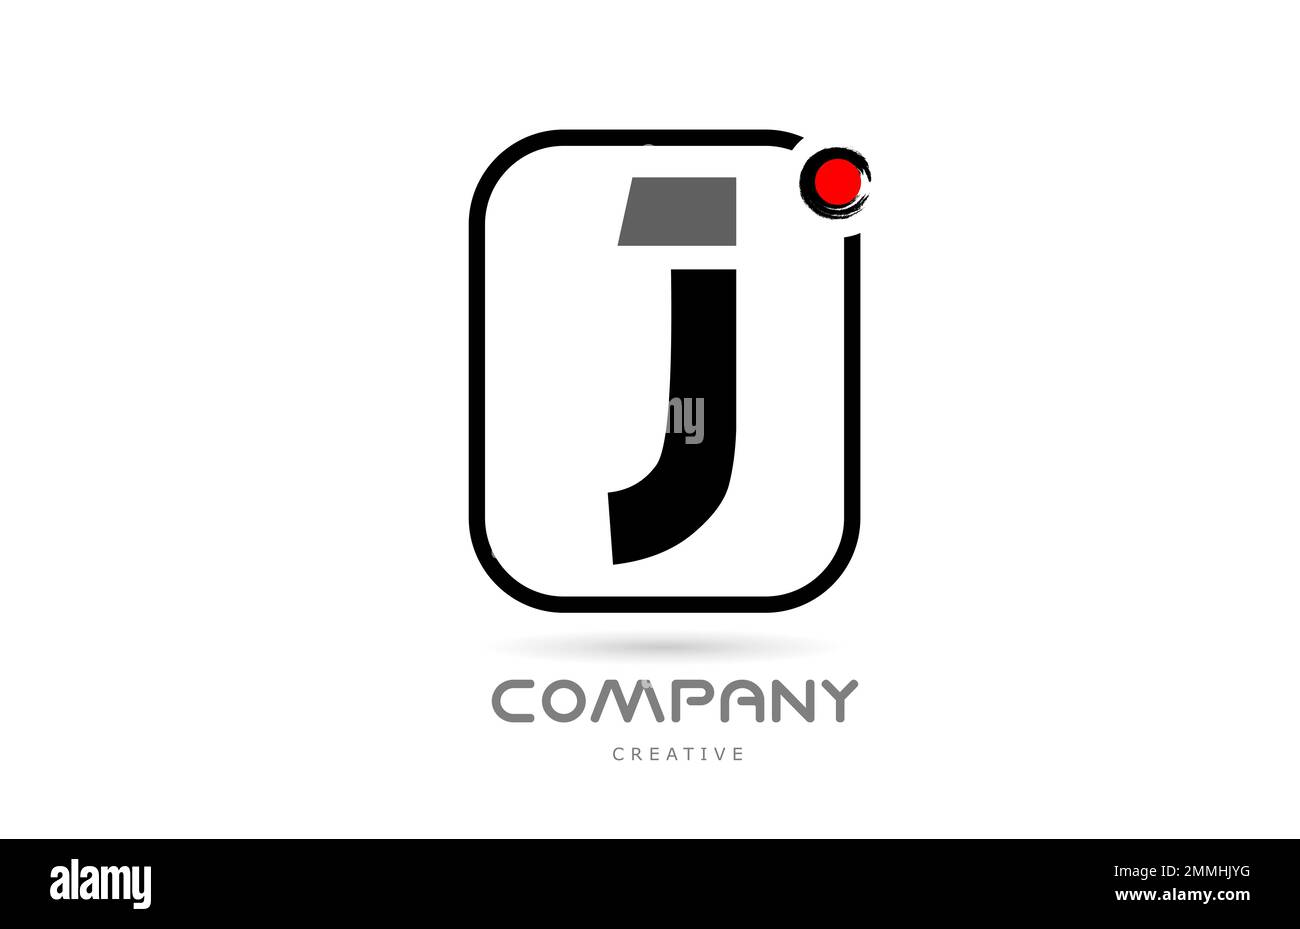 J black and white alphabet letter logo icon design with japanese style lettering and red dot. Creative template for company and business Stock Vector